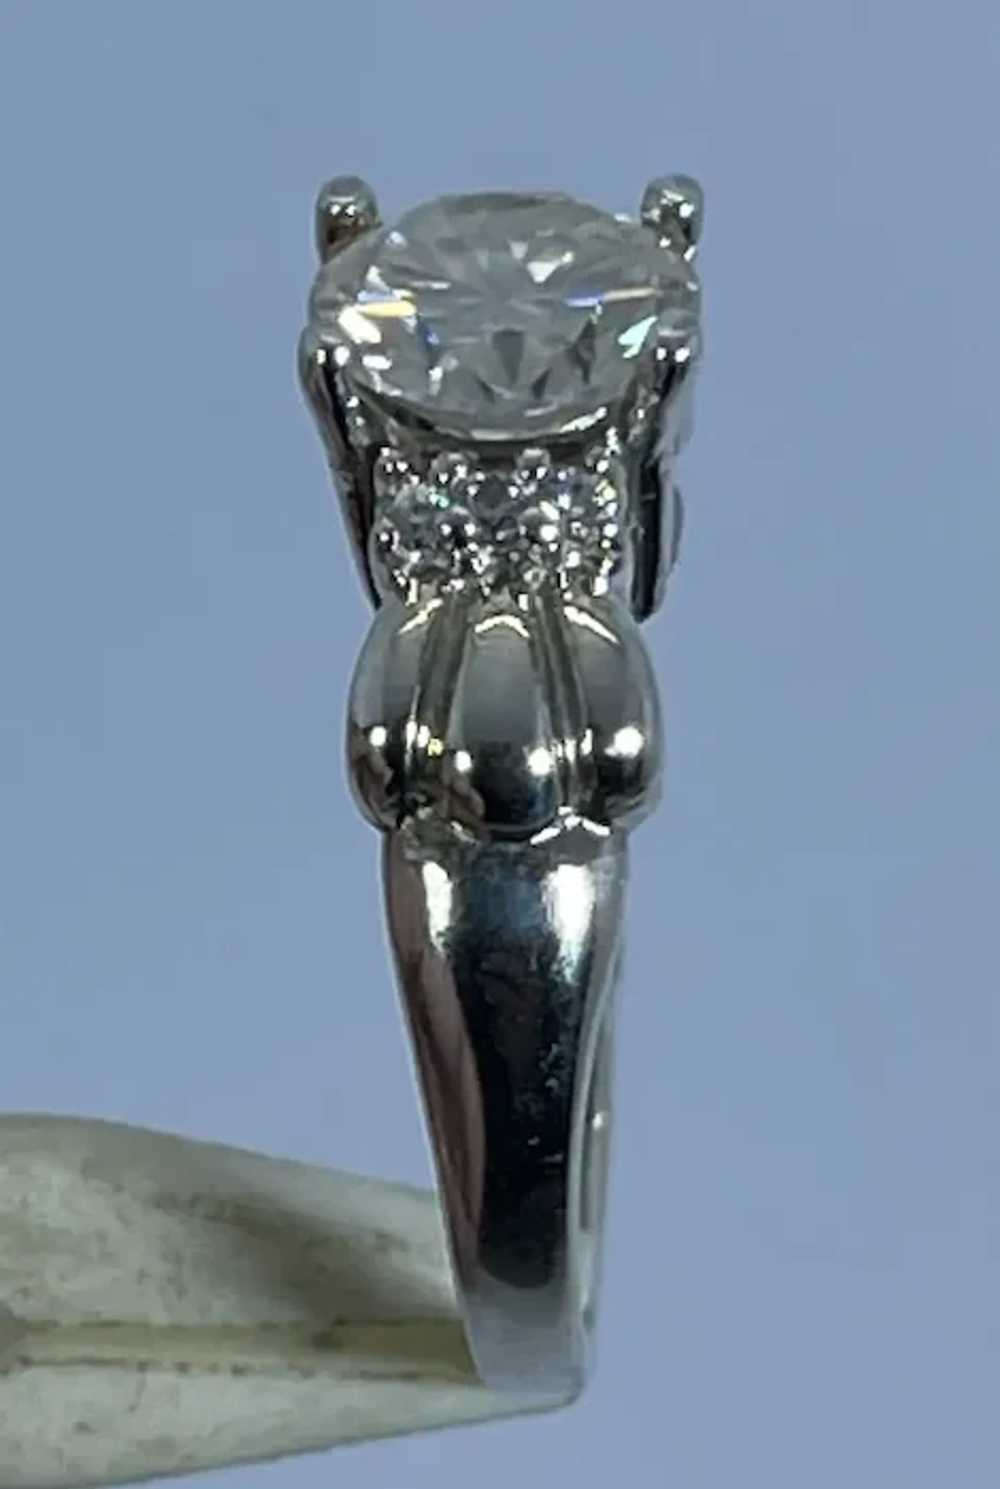 14k Moissanite & Diamonds Hand Crafted Ring - image 5